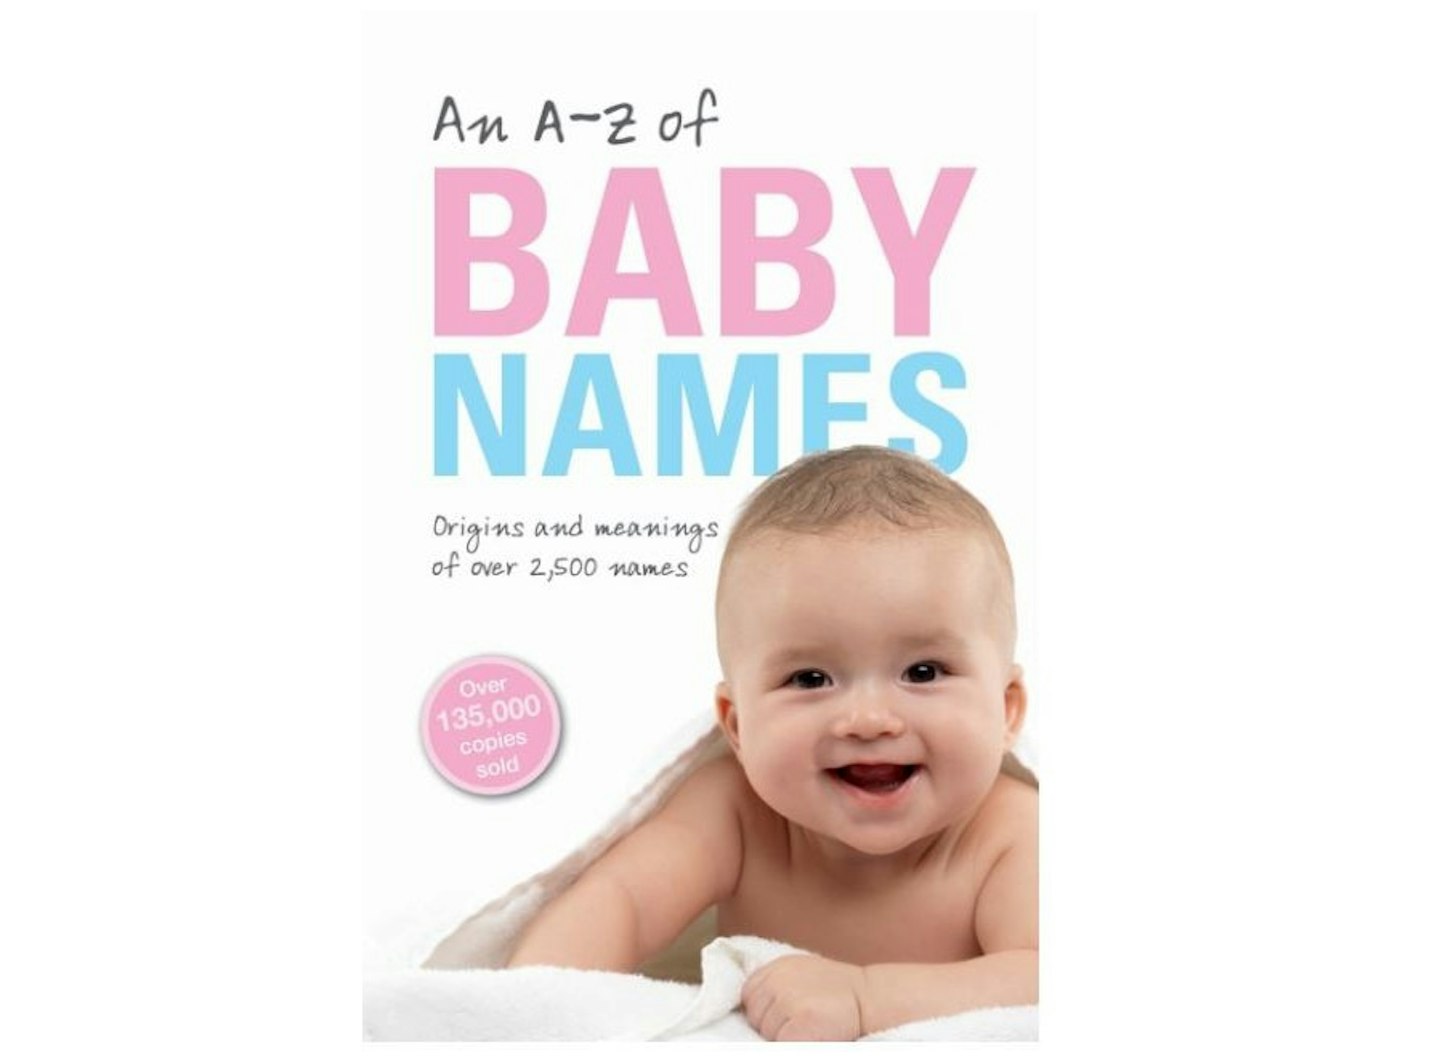 An A-Z of Baby Names, £4.45